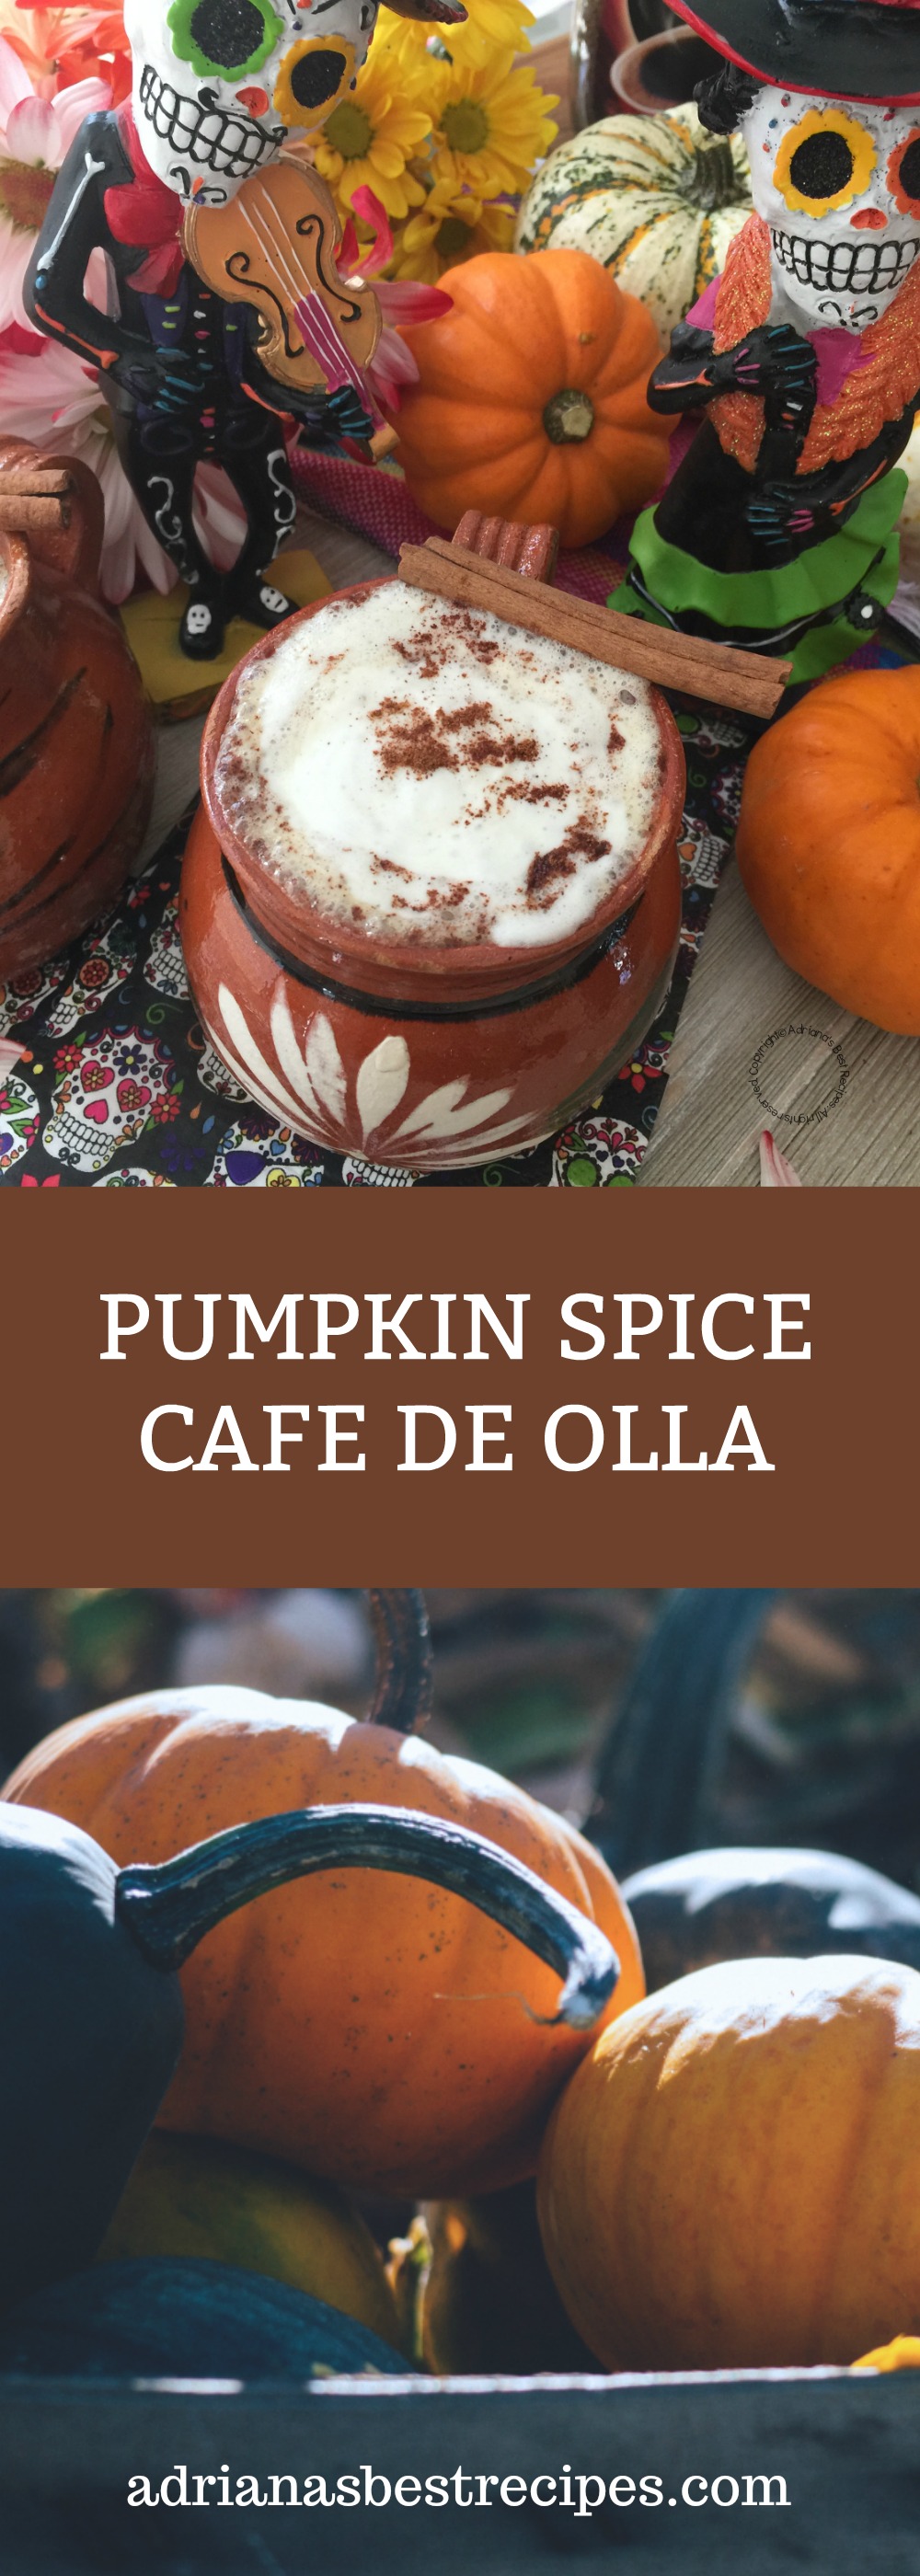 The Pumpkin Spice Cafe de Olla is inspired by the Pumpkin Spice Caffe Latte but with a Mexican touch. A yummy option for the Day of the Dead feast